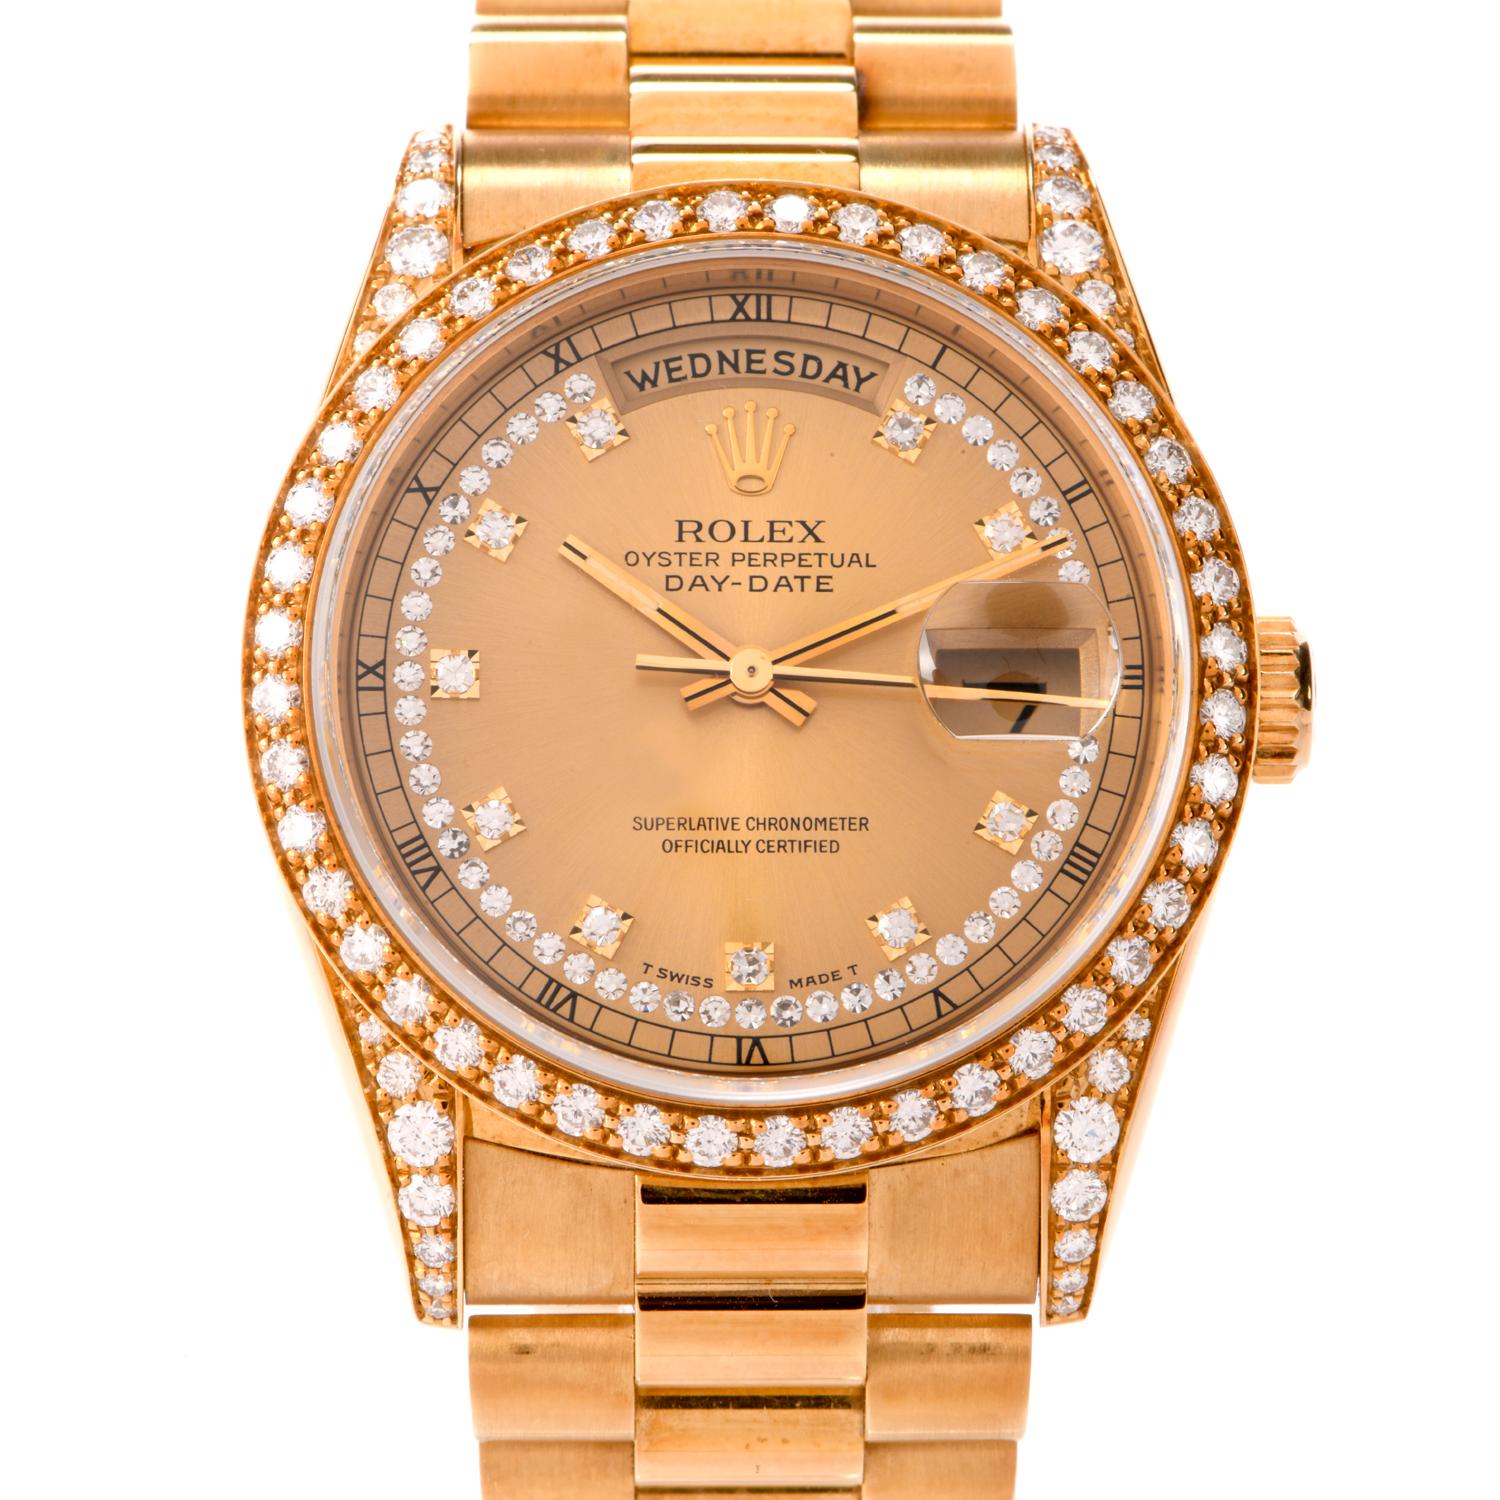 ROLEX President Day-Date Diamond String Diamond Log Dial Bezel Watch reference 18388

This Watch Say It.  Hardly worn in original condition!!

A Rare 36mm circa 1991 18k Yellow Gold Oyster Perpetual Day-Date Gents Wristwatch, 

champagne dial with a